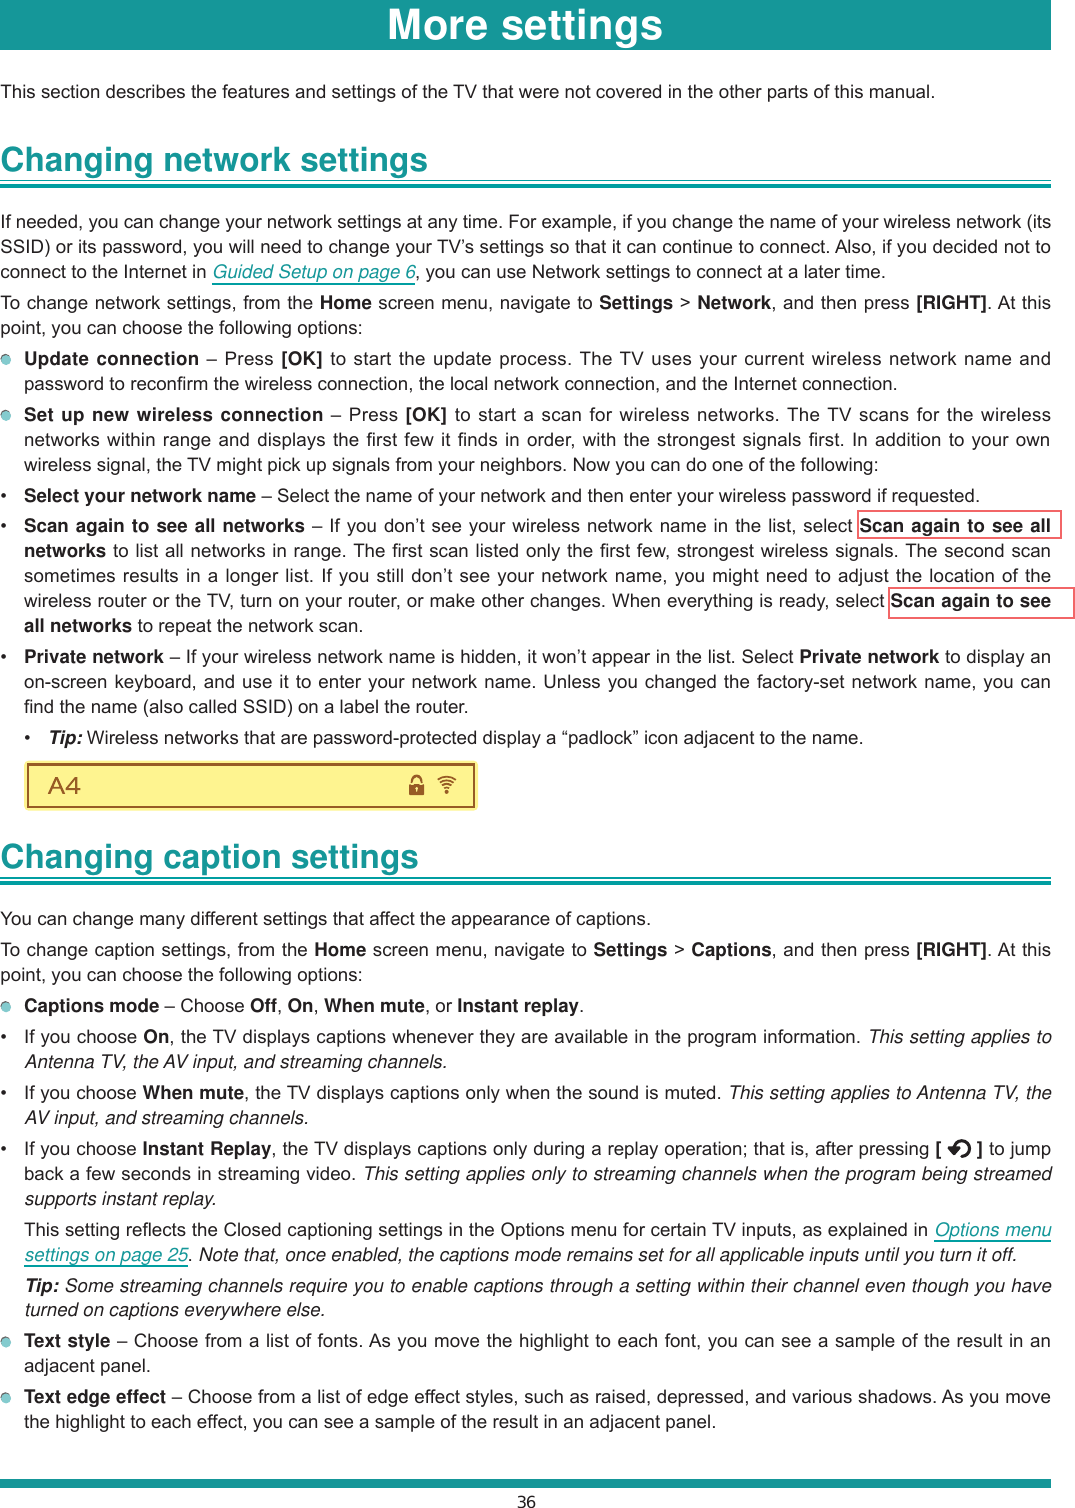 36More settingsThis section describes the features and settings of the TV that were not covered in the other parts of this manual.Changing network settings If needed, you can change your network settings at any time. For example, if you change the name of your wireless network (its SSID) or its password, you will need to change your TV’s settings so that it can continue to connect. Also, if you decided not to connect to the Internet in Guided Setup on page 6, you can use Network settings to connect at a later time.To change network settings, from the Home screen menu, navigate to Settings &gt; Network, and then press [RIGHT]. At this point, you can choose the following options: Update connection – Press [OK] to start the update process. The TV uses your current wireless network name and password to reconfirm the wireless connection, the local network connection, and the Internet connection. Set up new wireless connection – Press [OK] to start a scan for wireless networks. The TV scans for the wireless networks within range and displays the first few it finds in order, with the strongest signals first. In addition to your own wireless signal, the TV might pick up signals from your neighbors. Now you can do one of the following: Select your network name – Select the name of your network and then enter your wireless password if requested. Scan again to see all networks – If you don’t see your wireless network name in the list, select Scan again to see all networks to list all networks in range. The first scan listed only the first few, strongest wireless signals. The second scan sometimes results in a longer list. If you still don’t see your network name, you might need to adjust the location of the wireless router or the TV, turn on your router, or make other changes. When everything is ready, select Scan again to see all networks to repeat the network scan. Private network – If your wireless network name is hidden, it won’t appear in the list. Select Private network to display an on-screen keyboard, and use it to enter your network name. Unless you changed the factory-set network name, you can find the name (also called SSID) on a label the router. Tip: Wireless networks that are password-protected display a “padlock” icon adjacent to the name.Changing caption settings You can change many different settings that affect the appearance of captions.To change caption settings, from the Home screen menu, navigate to Settings &gt; Captions, and then press [RIGHT]. At this point, you can choose the following options: Captions mode – Choose Off, On, When mute, or Instant replay. If you choose On, the TV displays captions whenever they are available in the program information. This setting applies to Antenna TV, the AV input, and streaming channels. If you choose When mute, the TV displays captions only when the sound is muted. This setting applies to Antenna TV, the AV input, and streaming channels. If you choose Instant Replay, the TV displays captions only during a replay operation; that is, after pressing [   ] to jump back a few seconds in streaming video. This setting applies only to streaming channels when the program being streamed supports instant replay.  This setting reflects the Closed captioning settings in the Options menu for certain TV inputs, as explained in Options menu settings on page 25. Note that, once enabled, the captions mode remains set for all applicable inputs until you turn it off. Tip: Some streaming channels require you to enable captions through a setting within their channel even though you have turned on captions everywhere else. Text style – Choose from a list of fonts. As you move the highlight to each font, you can see a sample of the result in an adjacent panel. Text edge effect – Choose from a list of edge effect styles, such as raised, depressed, and various shadows. As you move the highlight to each effect, you can see a sample of the result in an adjacent panel.